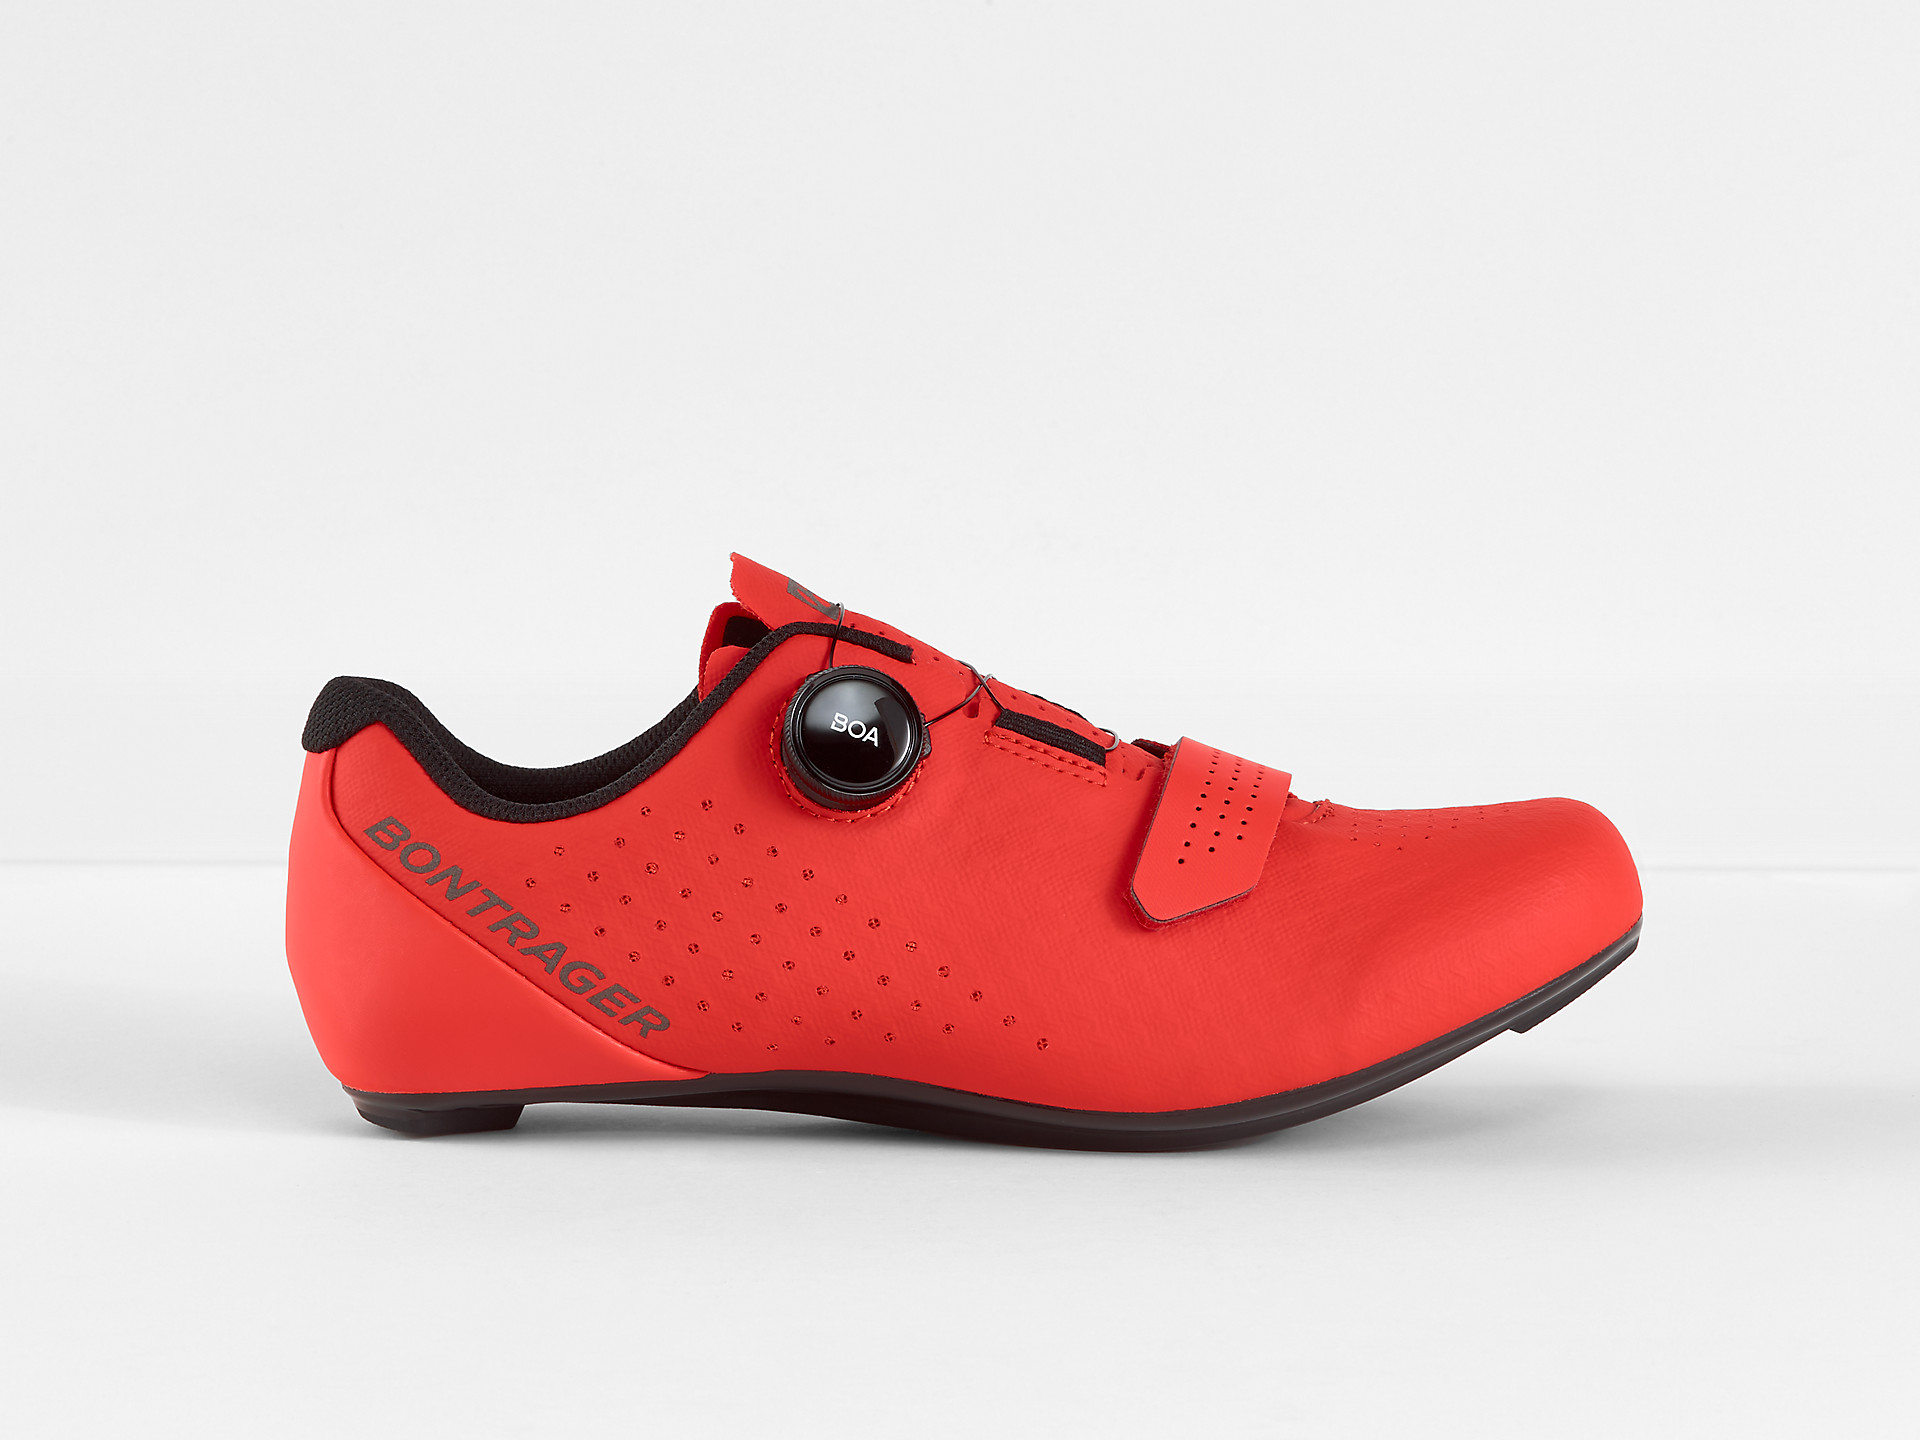 <a href="https://cycles-clement.be/product/chaussure-bont-circuit-race-44-red/">CHAUSSURE BONT CIRCUIT RACE 44 RED</a>